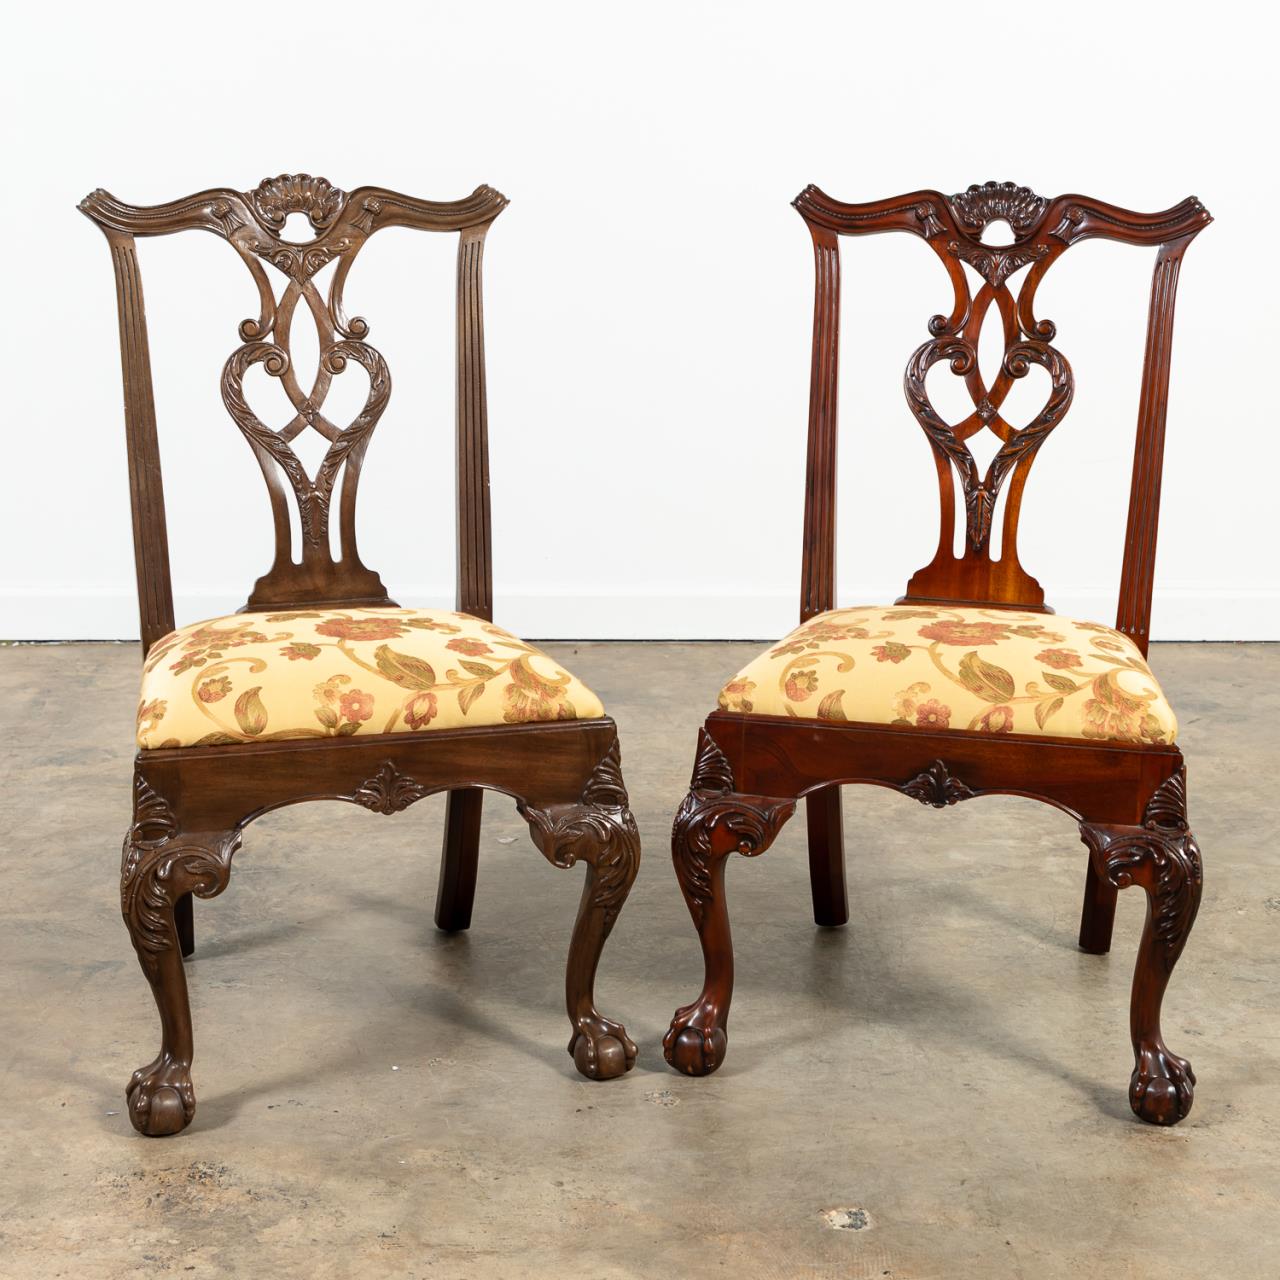 PAIR, CHIPPENDALE-STYLE MAHOGANY